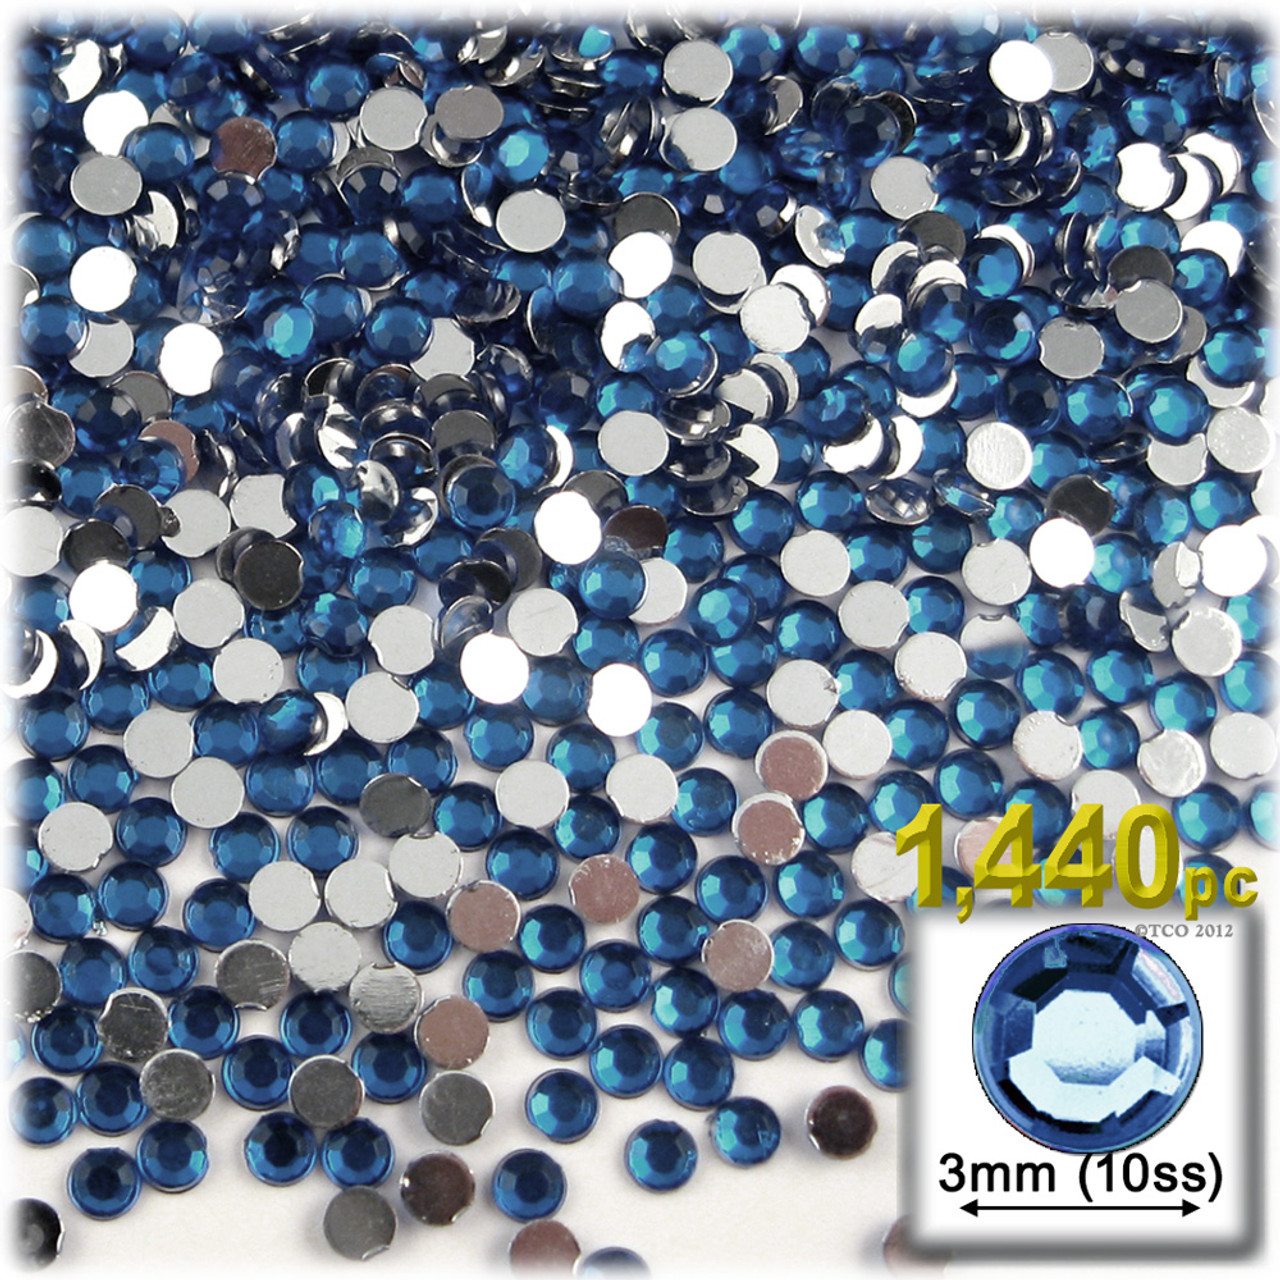  The Crafts Outlet 1,440pc Rhinestones Round 3mm (10ss